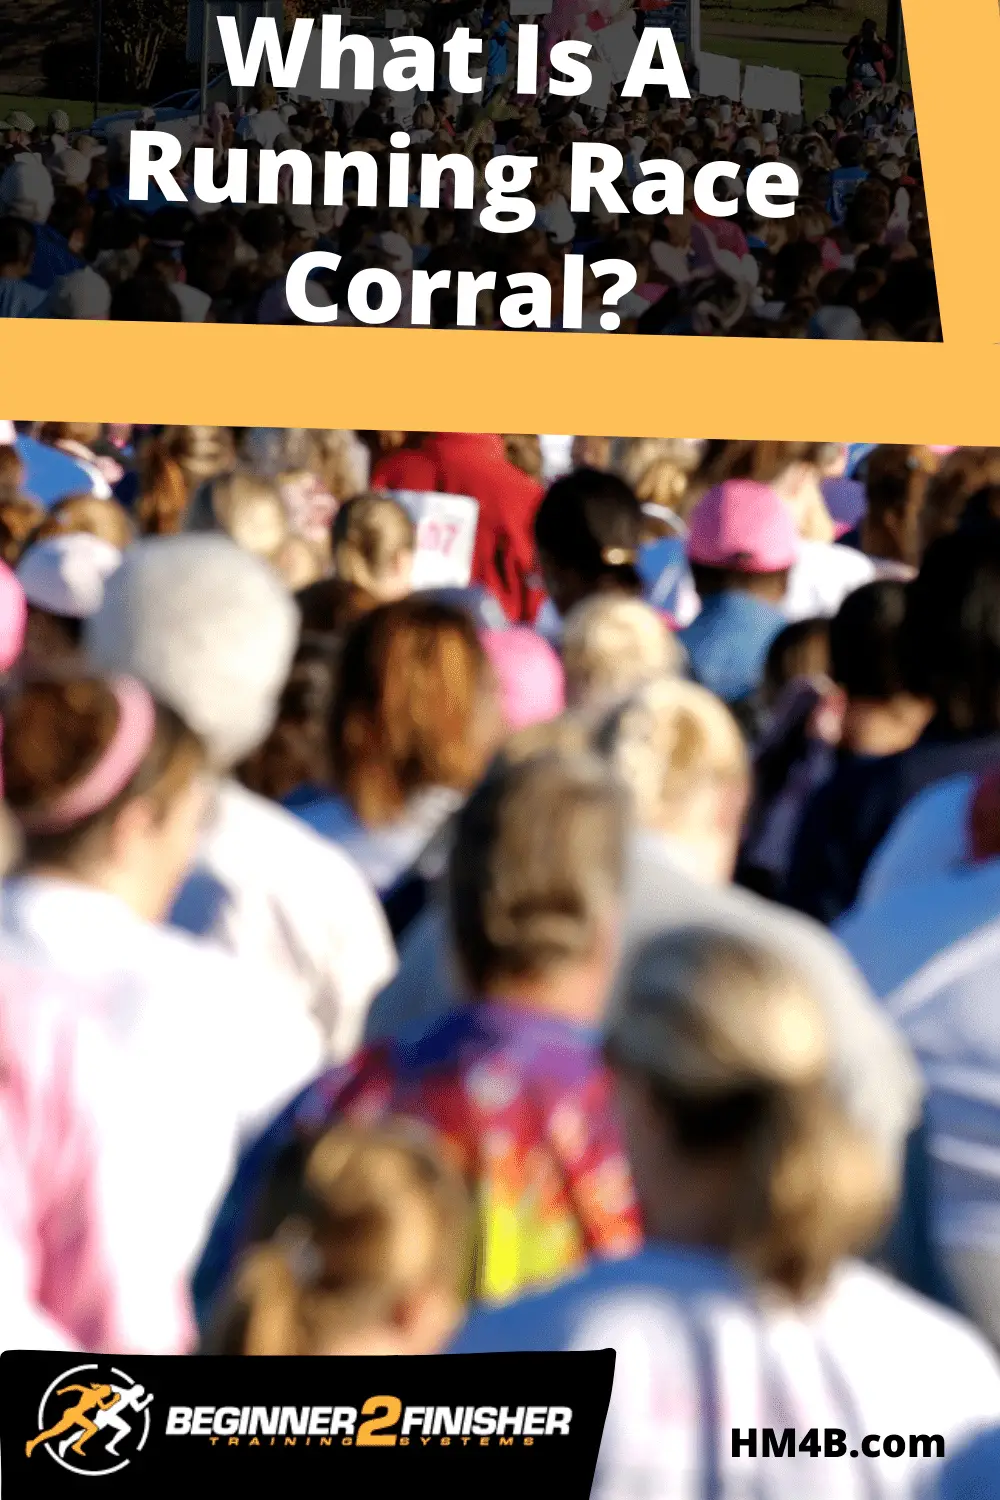 Why Does My Running Race Have A Corral? What is a Corral Used For?